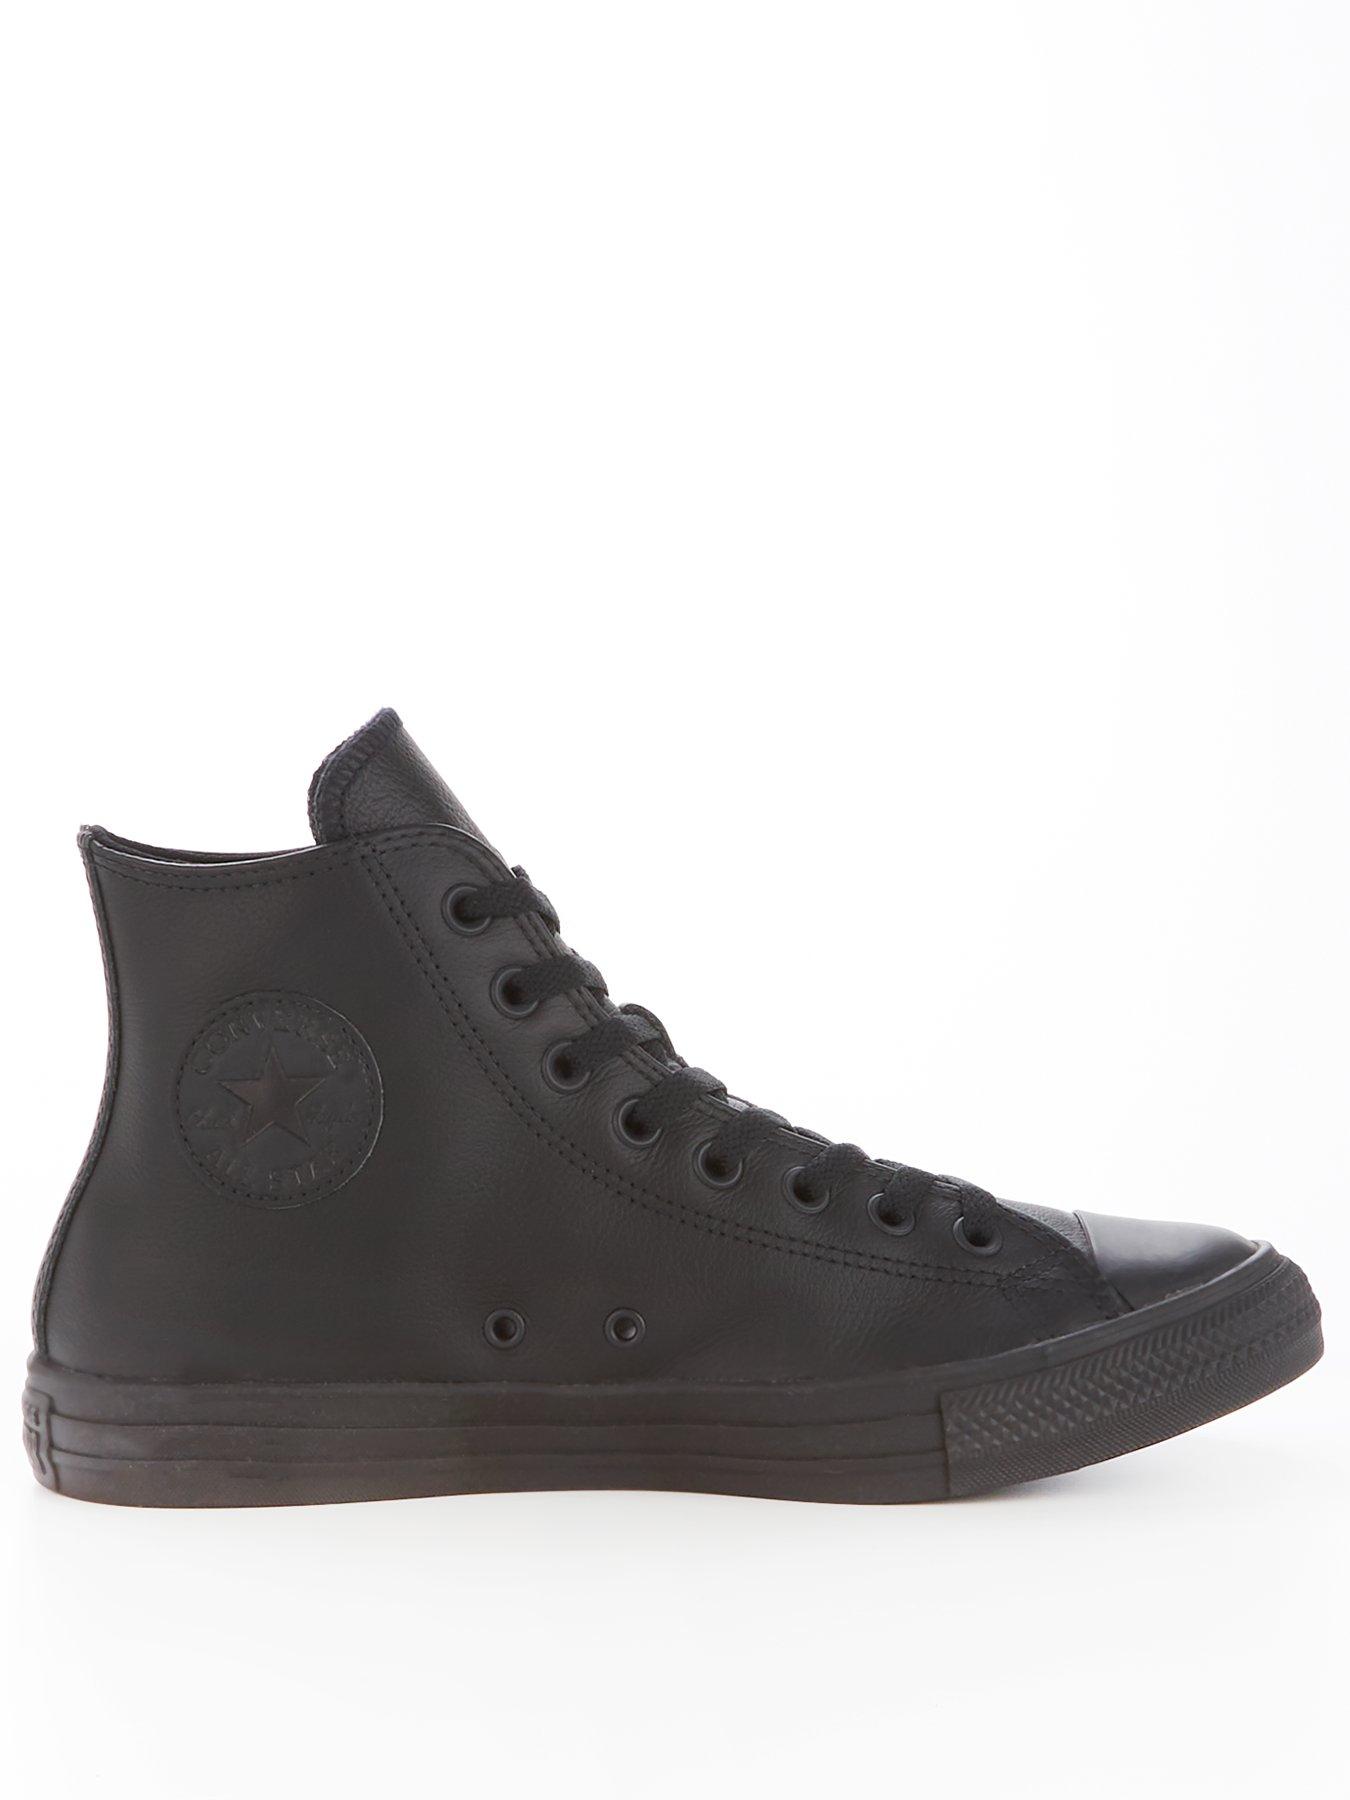 black leather high top converse mens